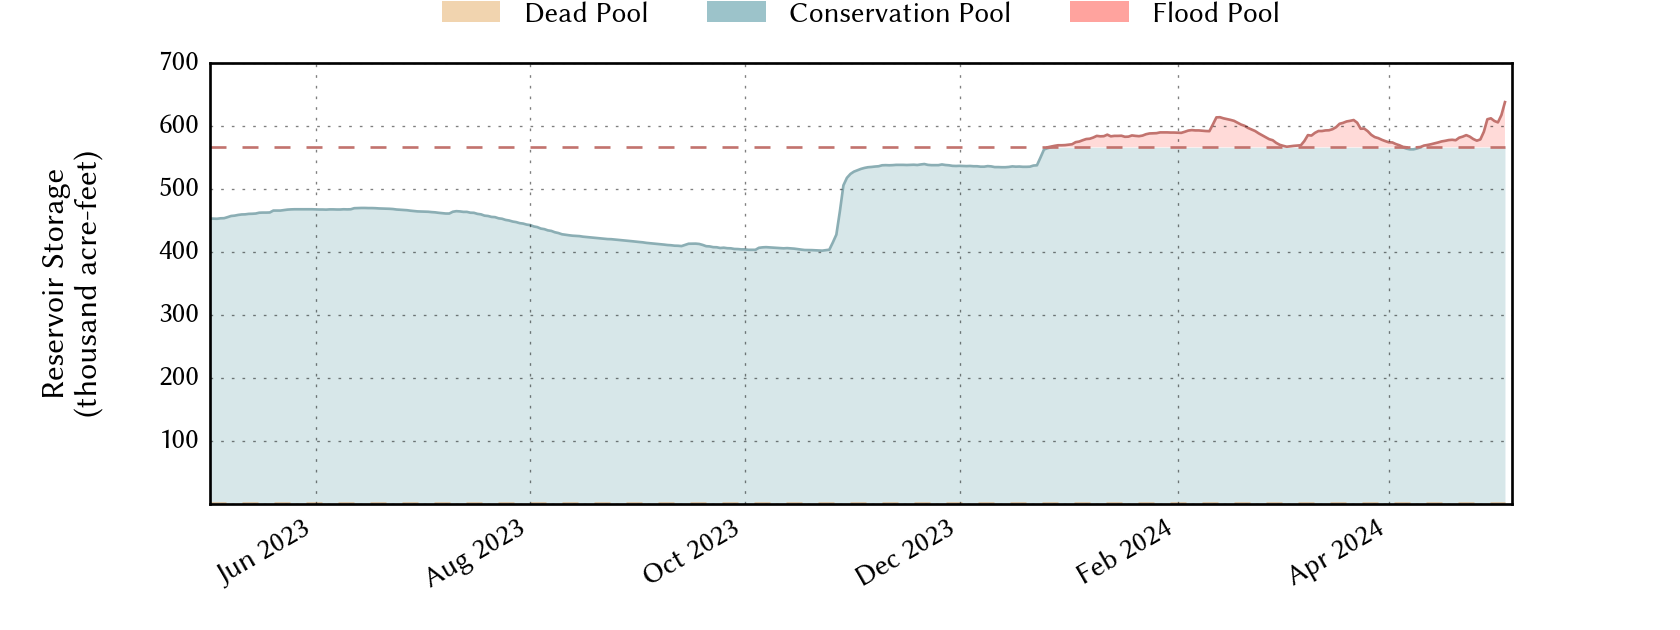 Current lake whitney water level graph